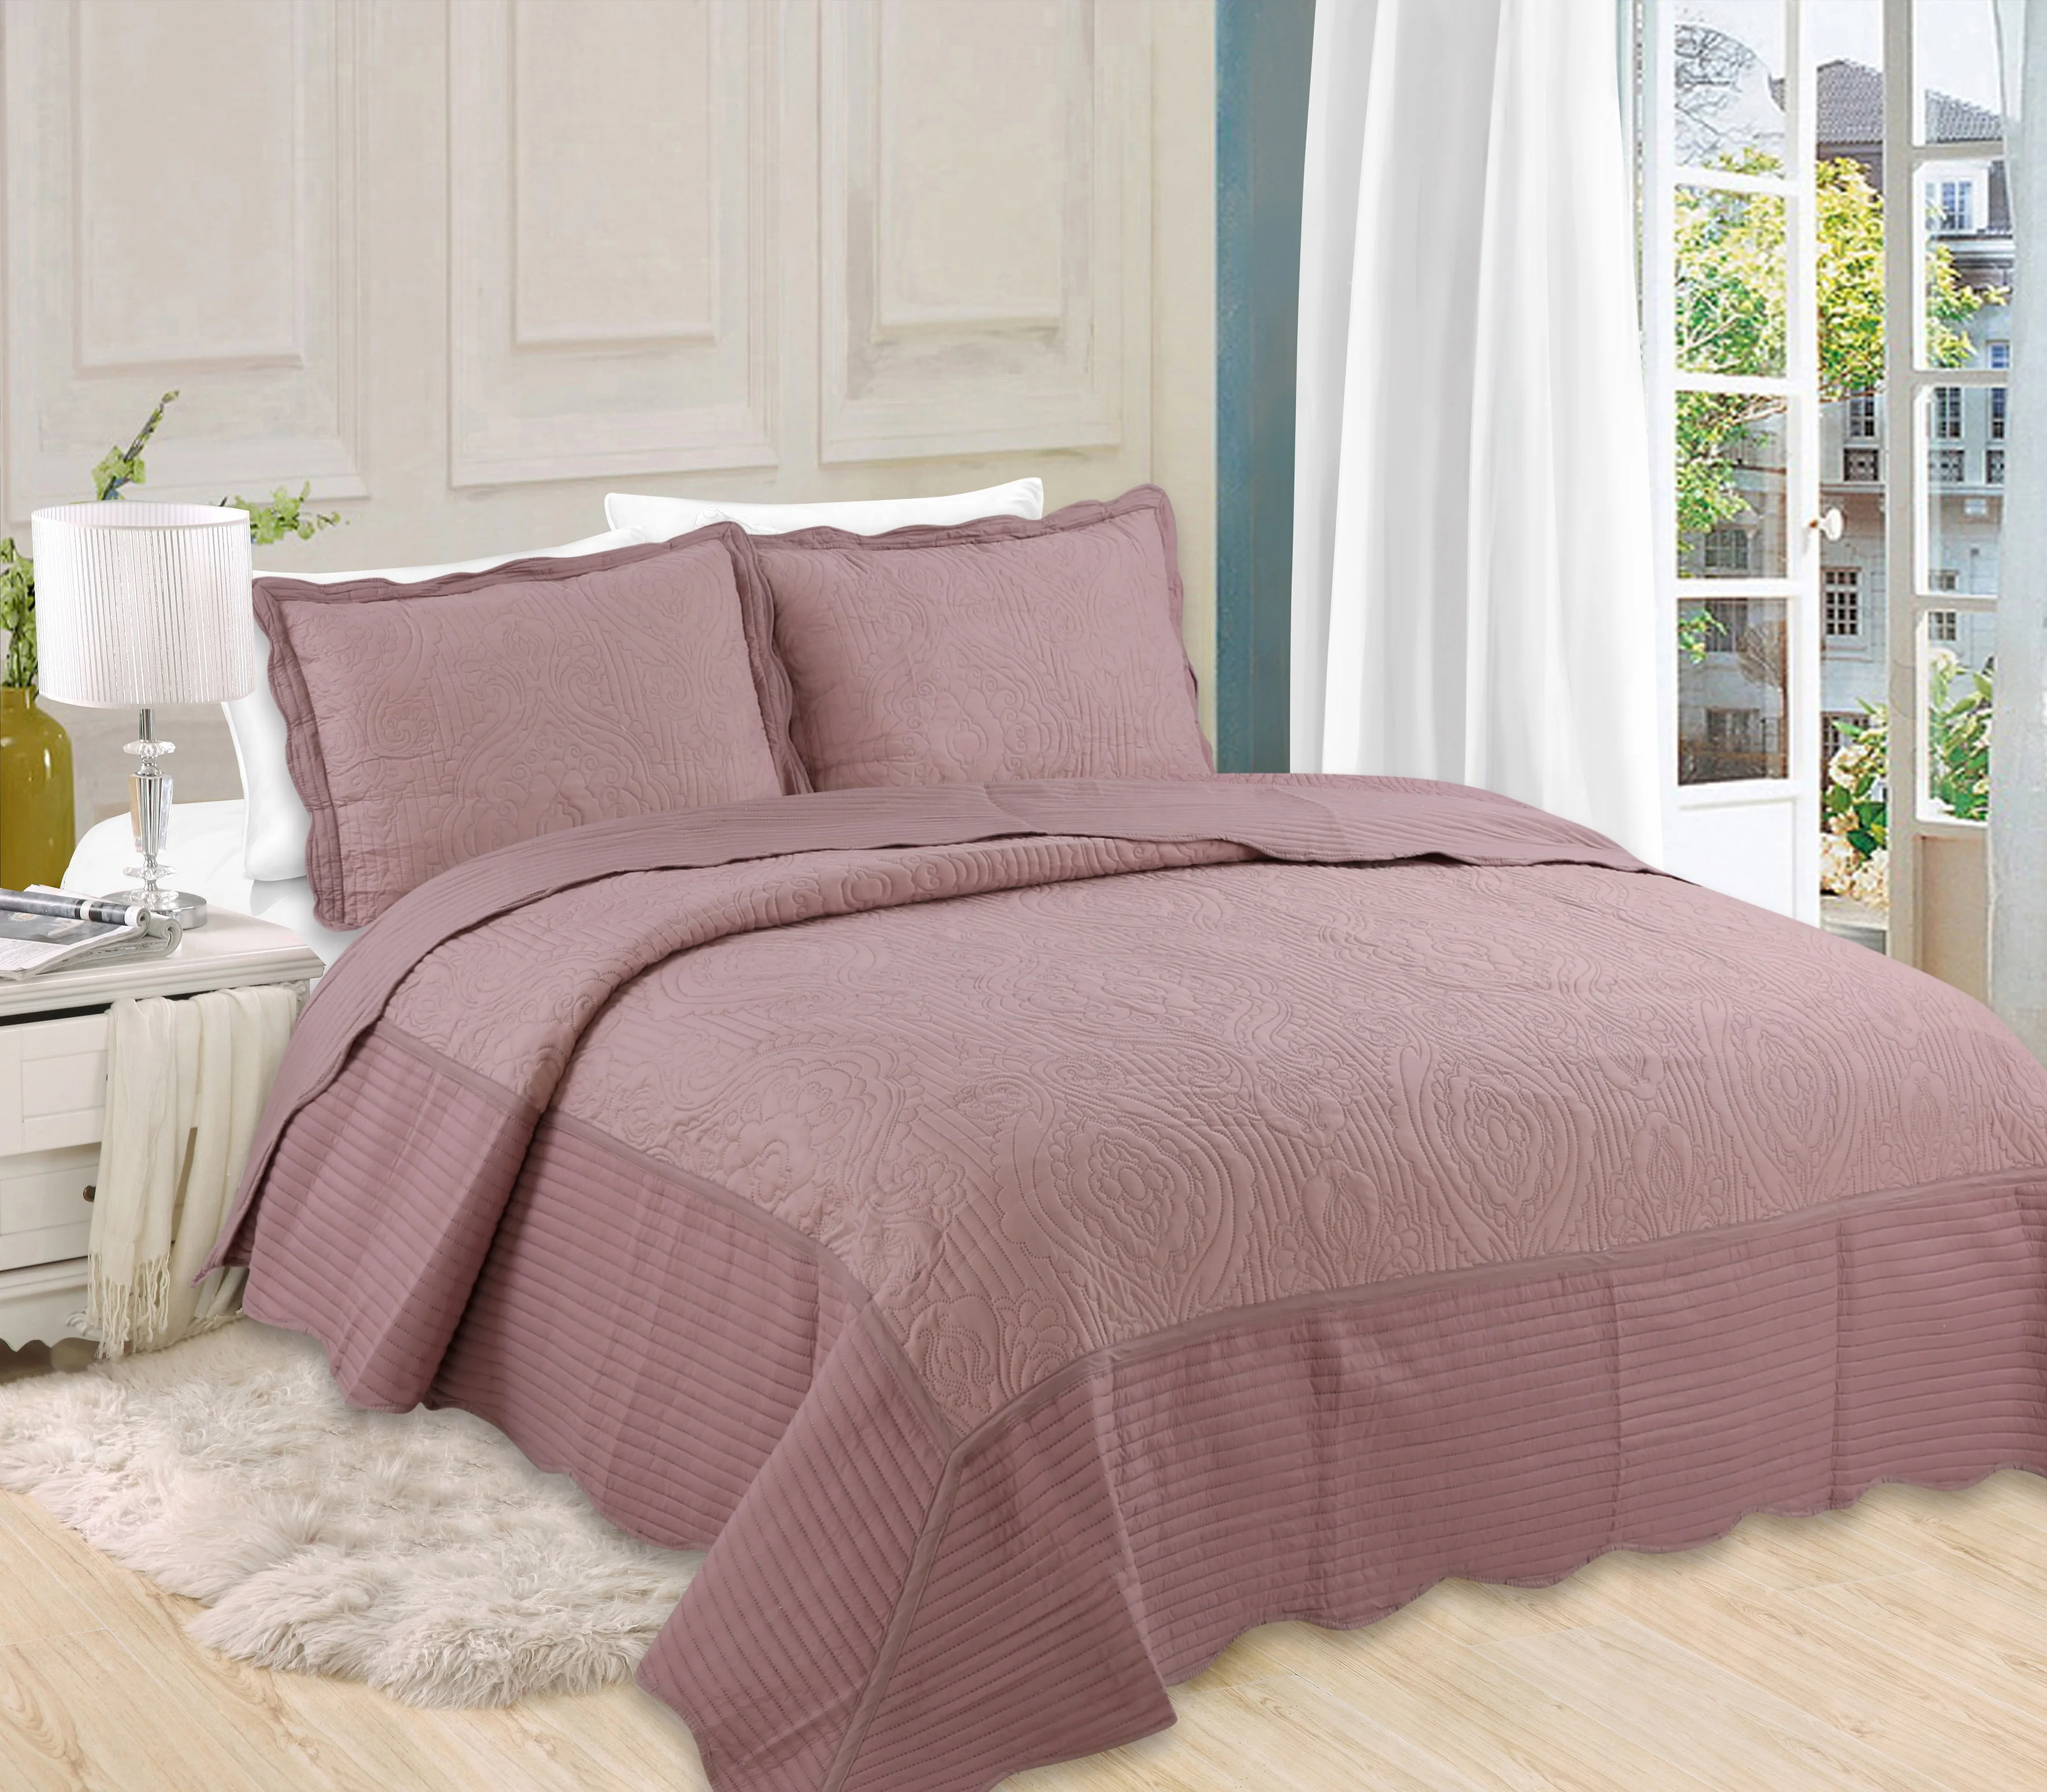 Luxury solid bedspread 100% polyester microfiber fabric for bedding set light weight polyester bedspreads quilts single